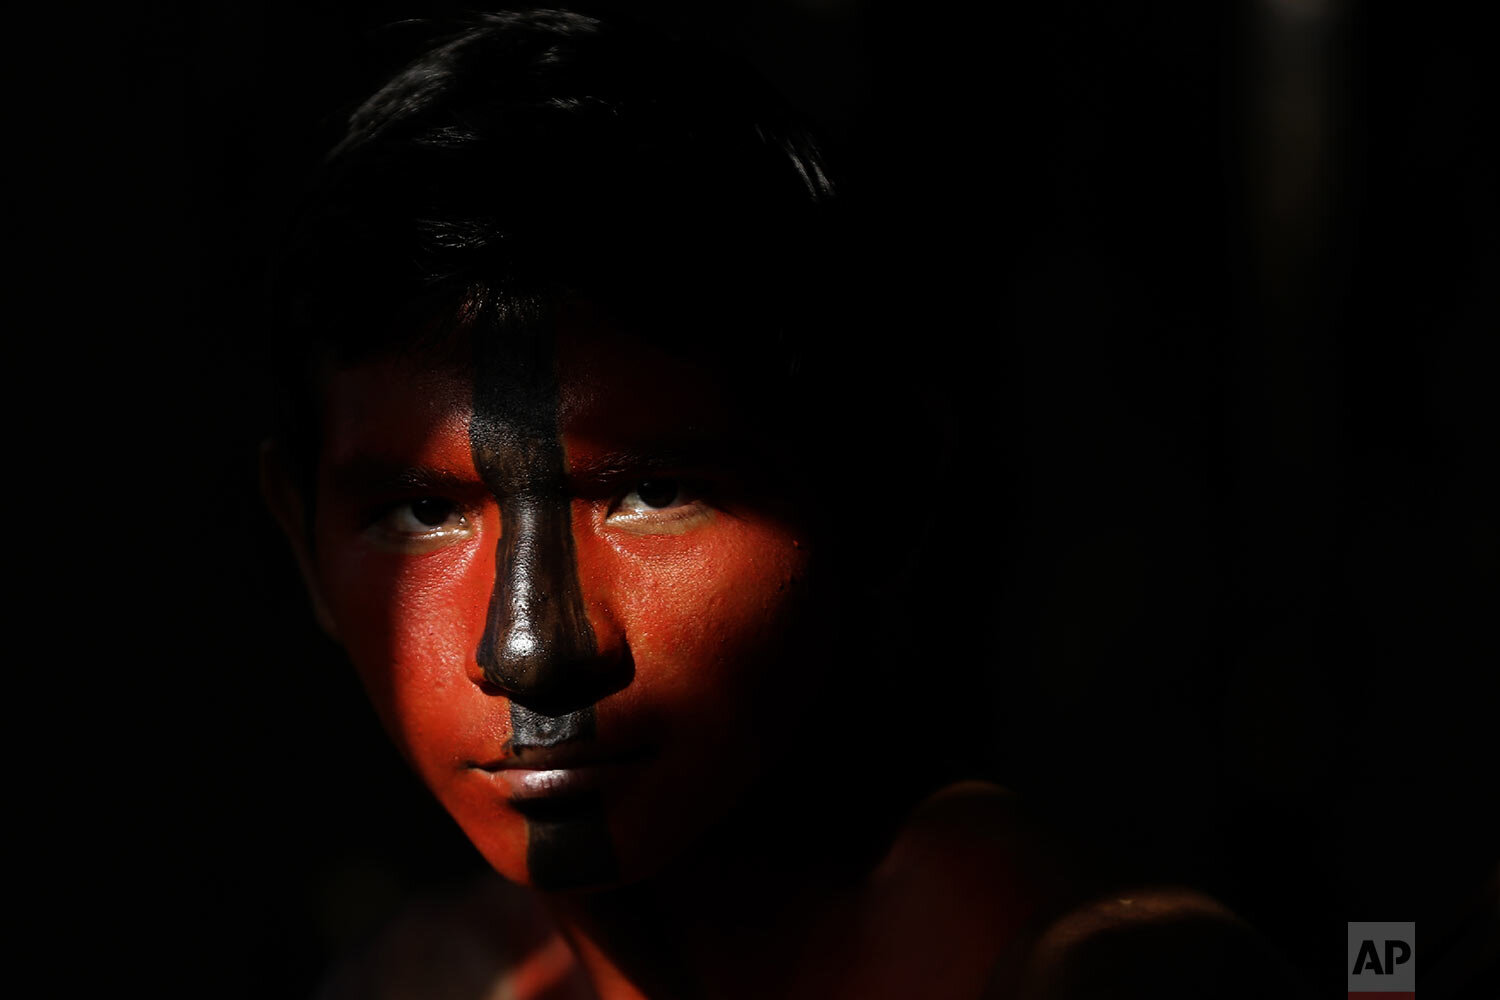  Tenetehara Indigenous Jair Tembe is ready to take part in a festival on the Alto Rio Guama Indigenous Territory, near the city of Paragominas, Brazil, Sept. 7, 2020. The Indigenous group, also known as Tembe, held a festival this week to celebrate a